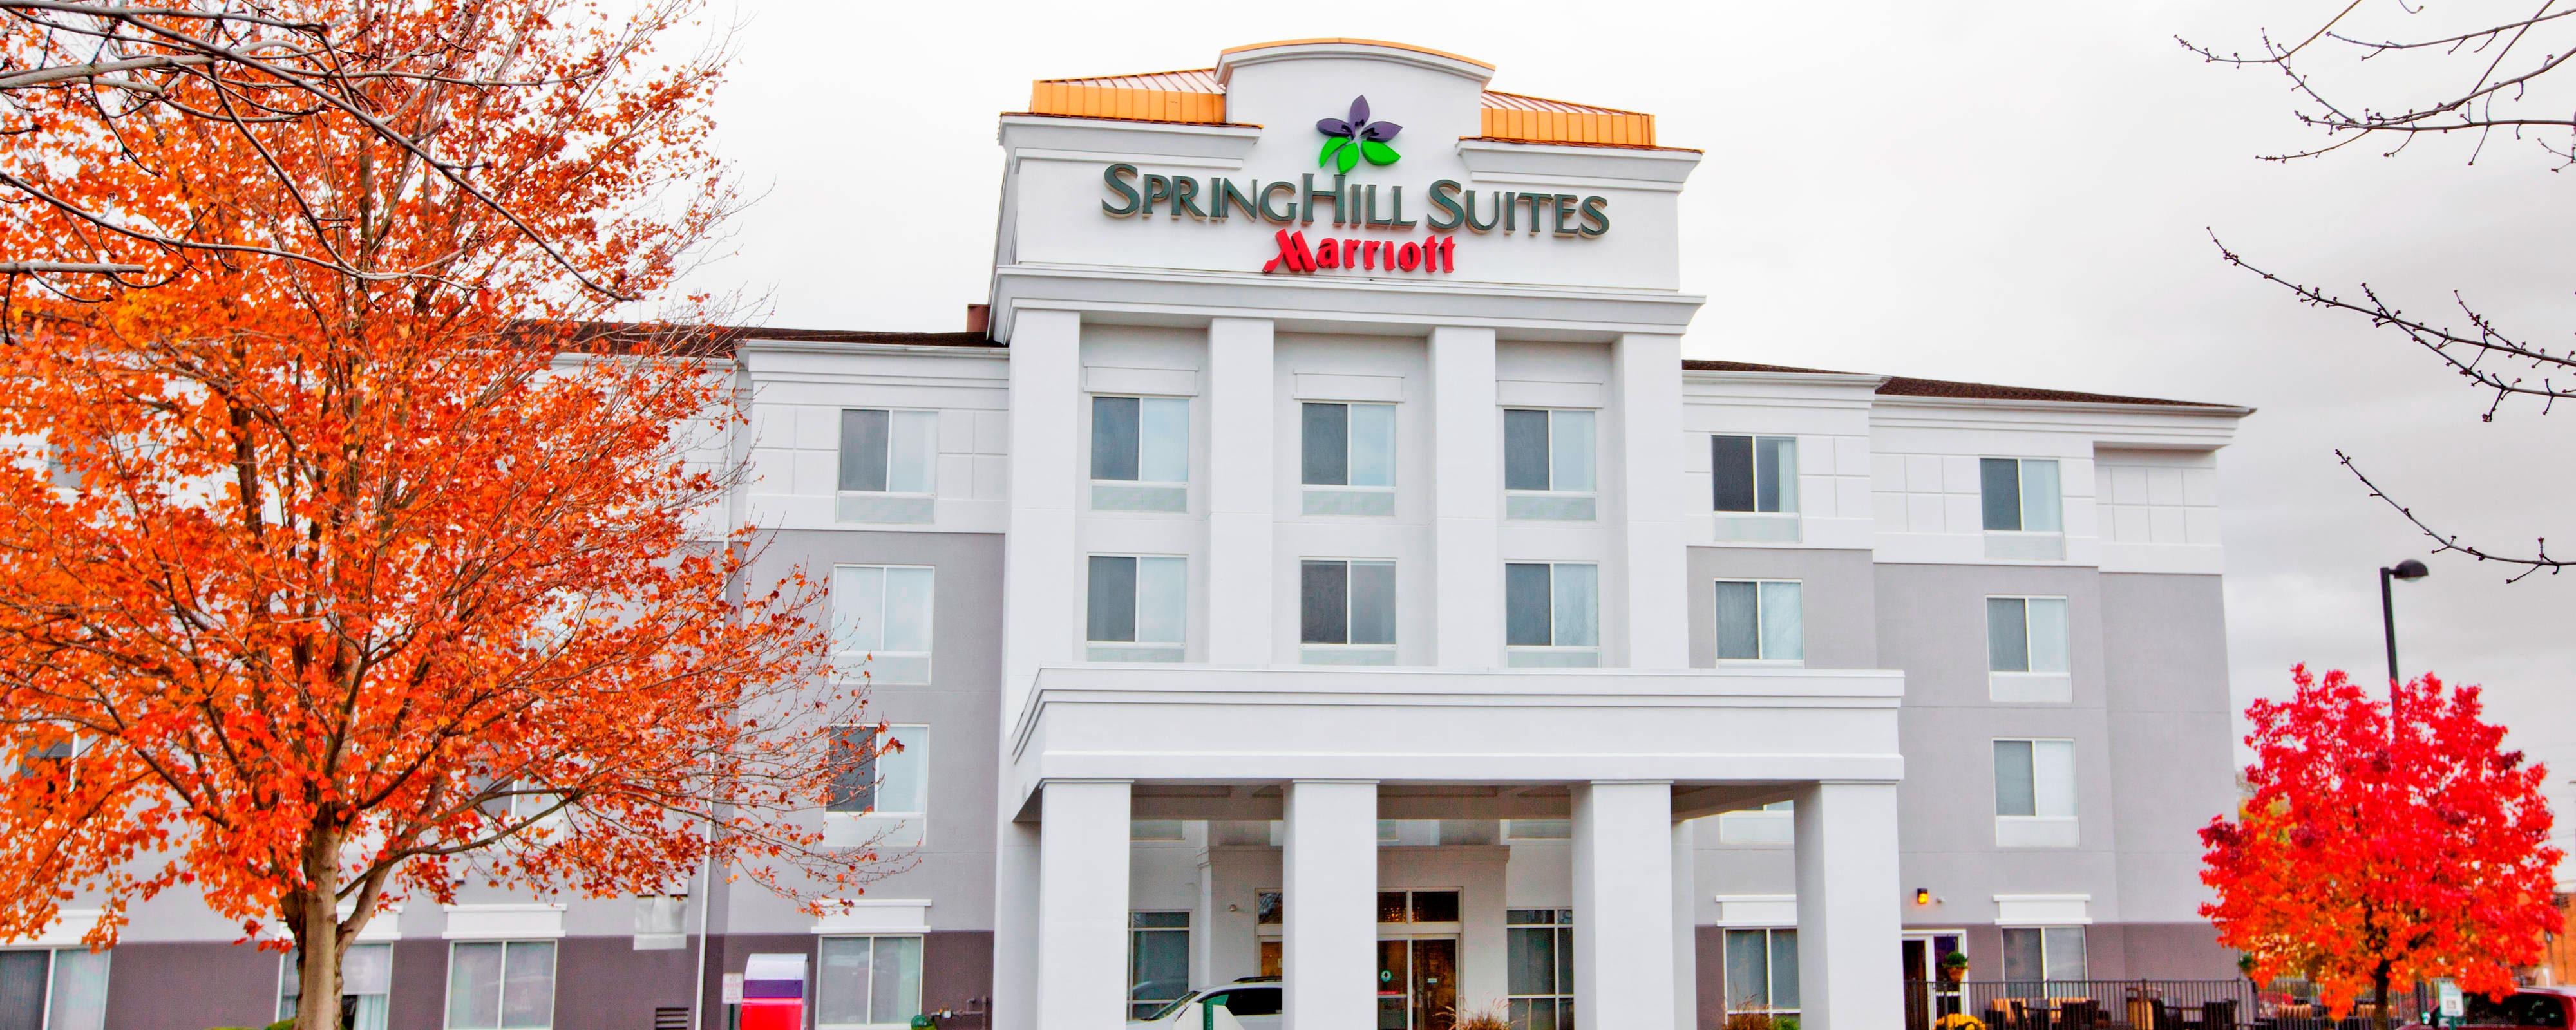 Hotel Photos Springhill Suites, Springhill Furniture Greensburg